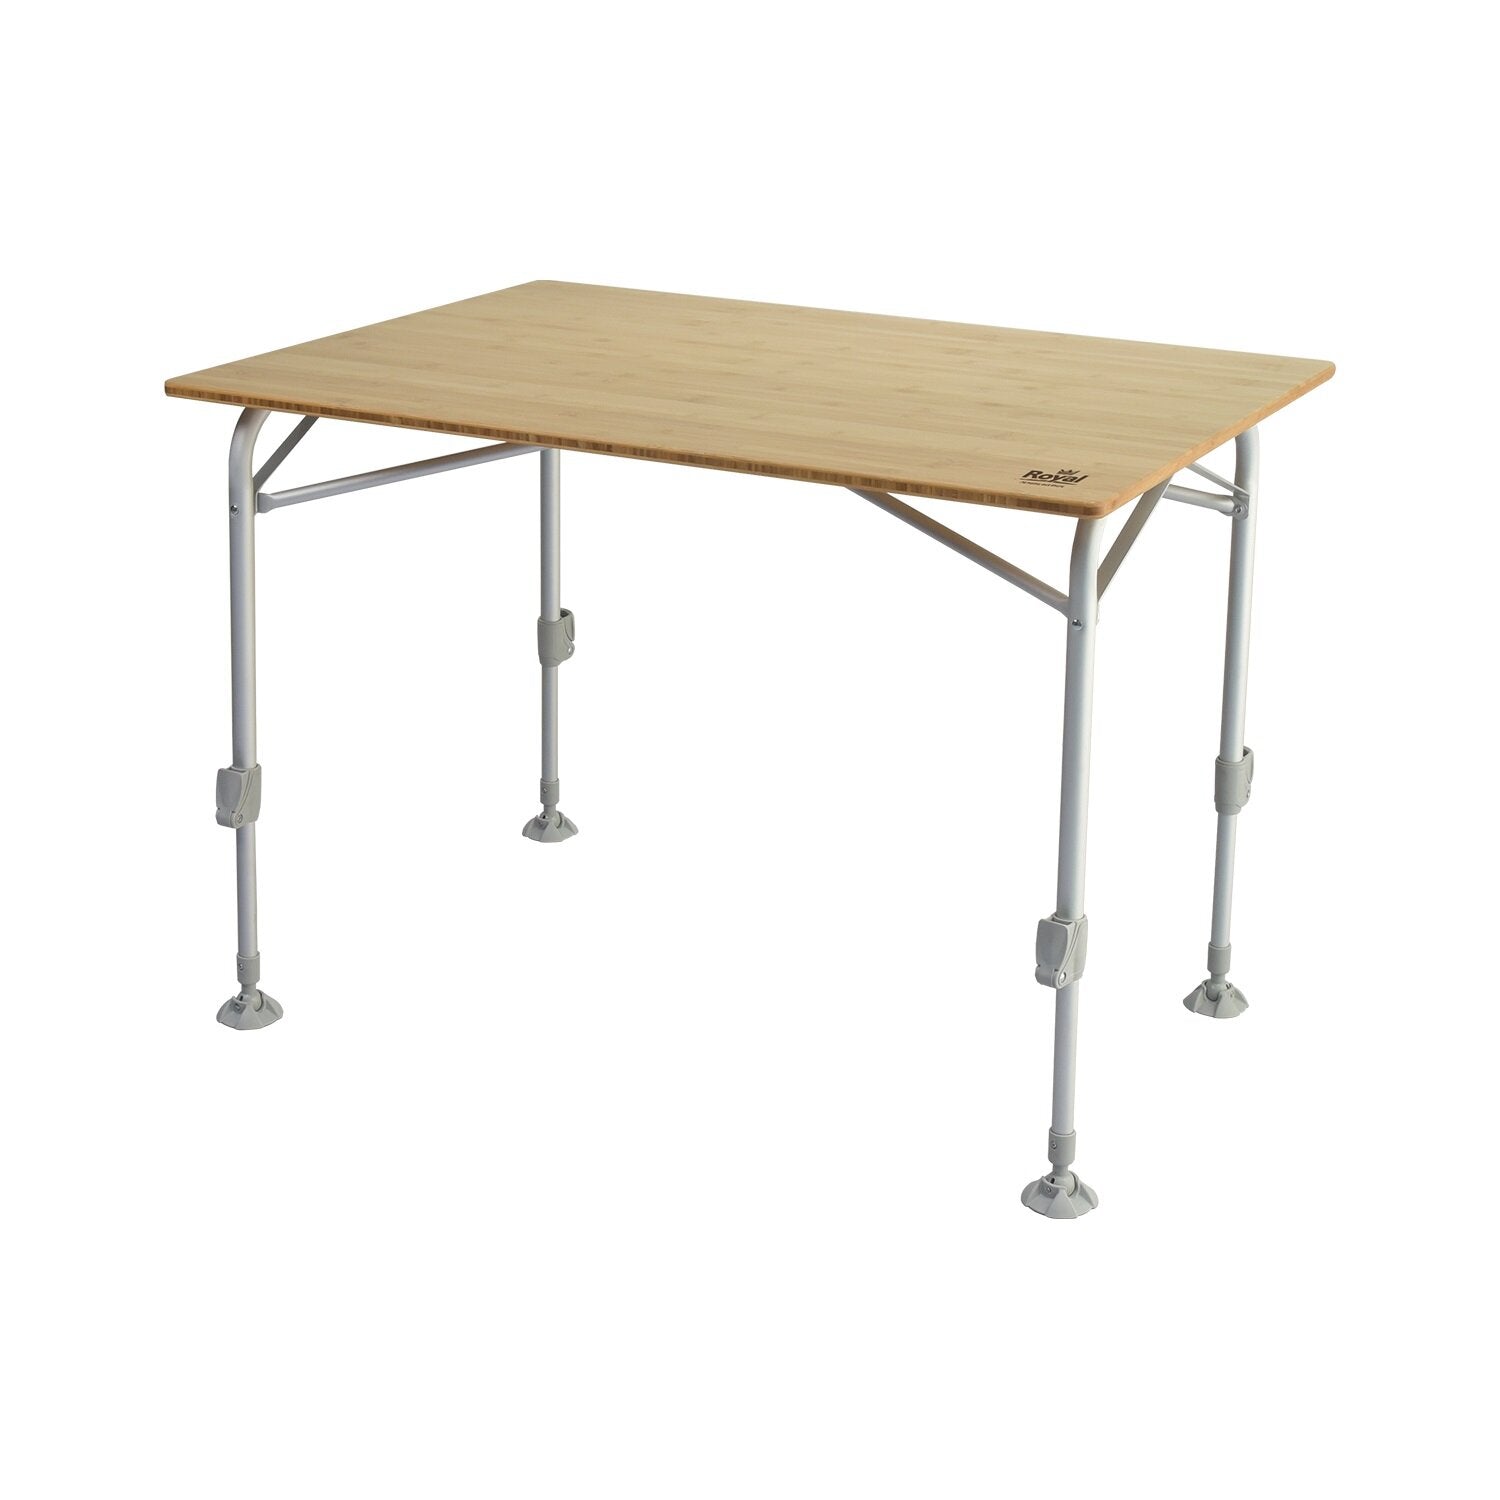 Royal Leisure Deluxe Sustainable Bamboo Table